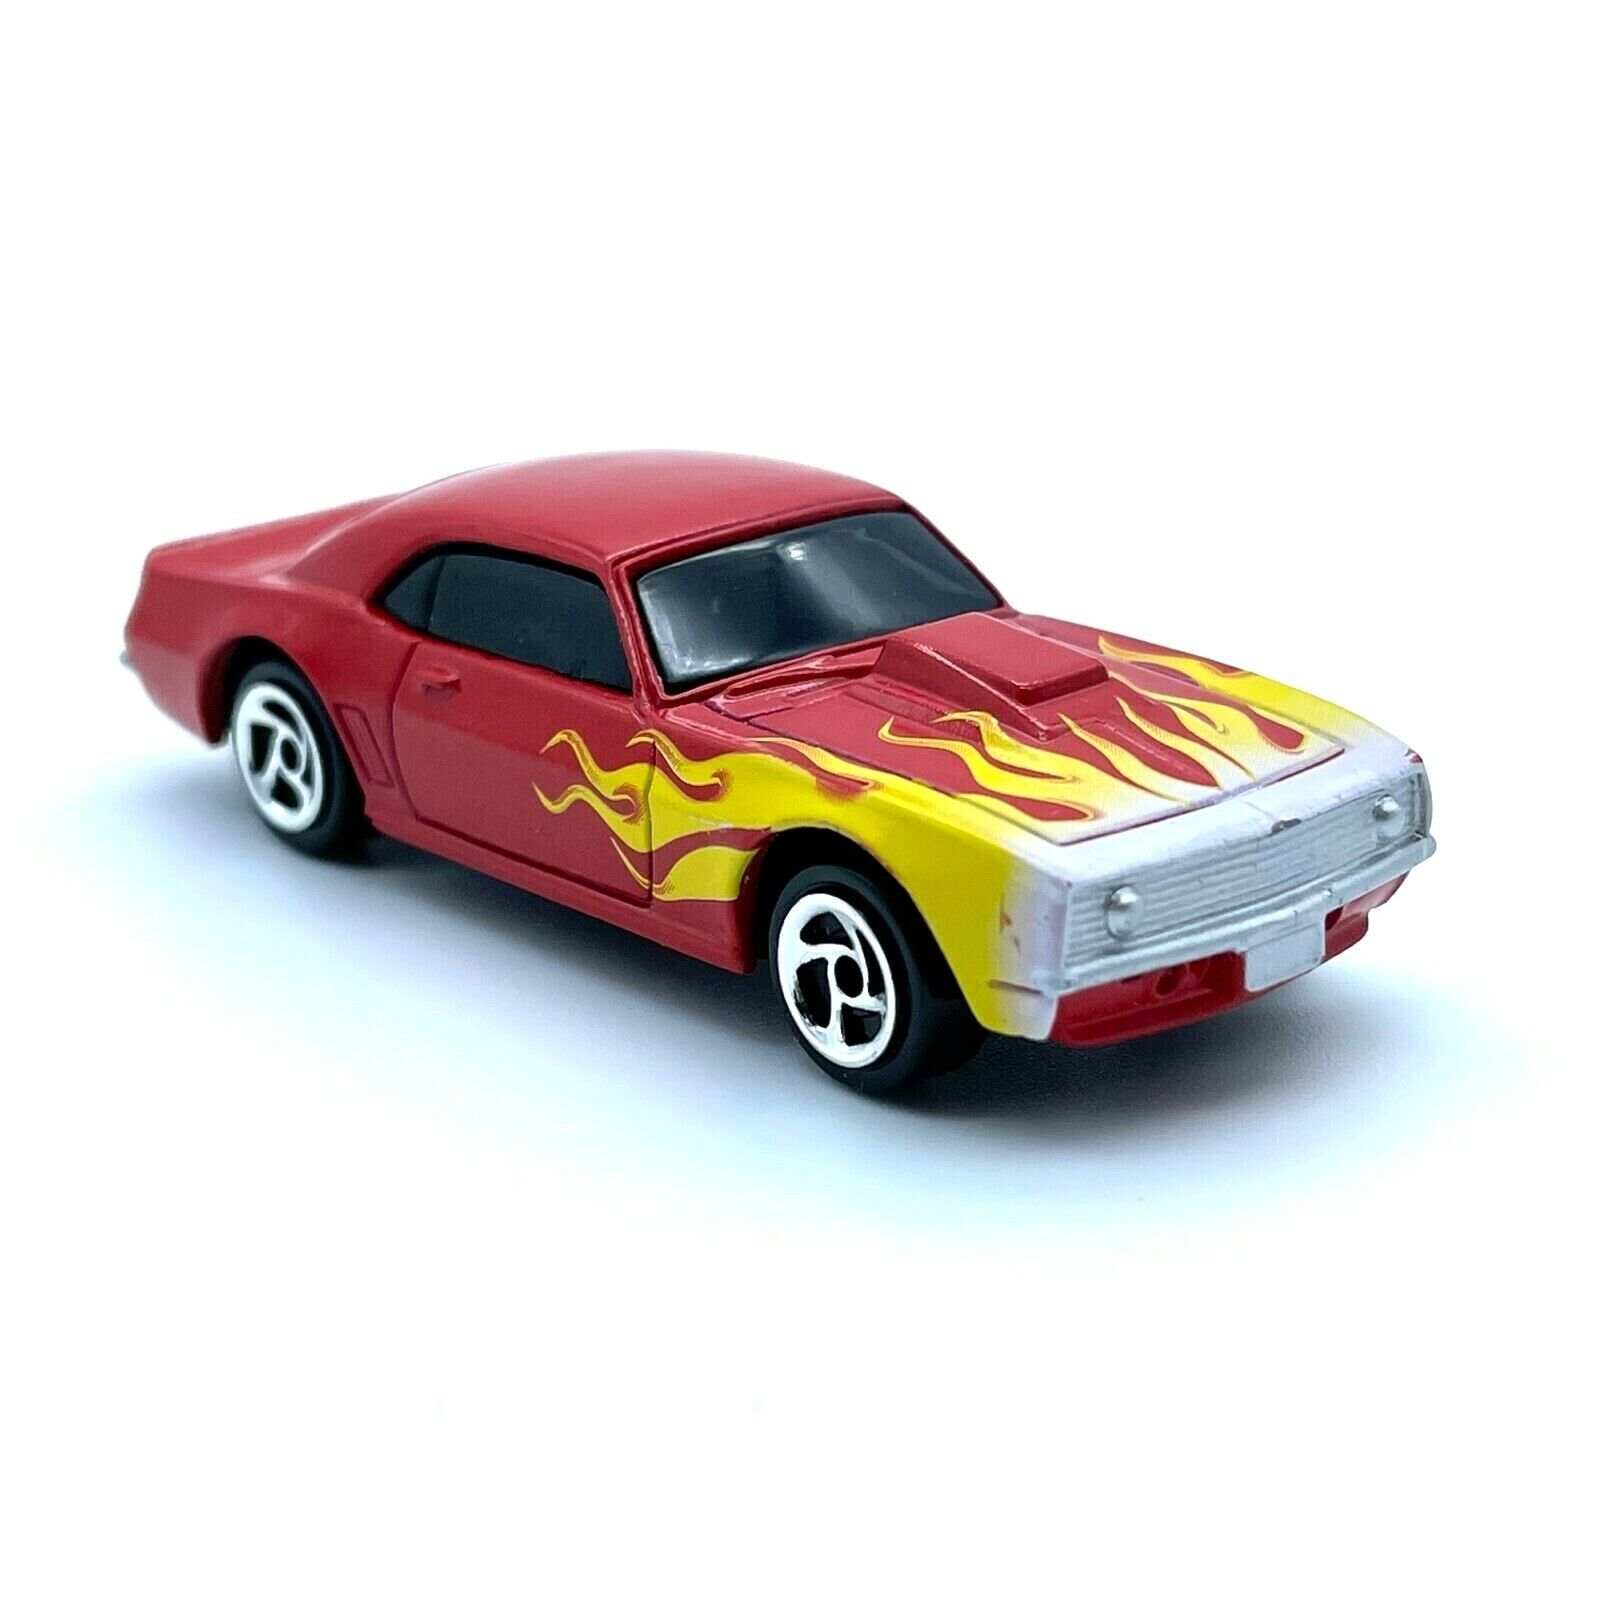 Road Champs 1969 69 Chevrolet Chevy Camaro Car Red Working Suspension 1/64 Loose - $14.80